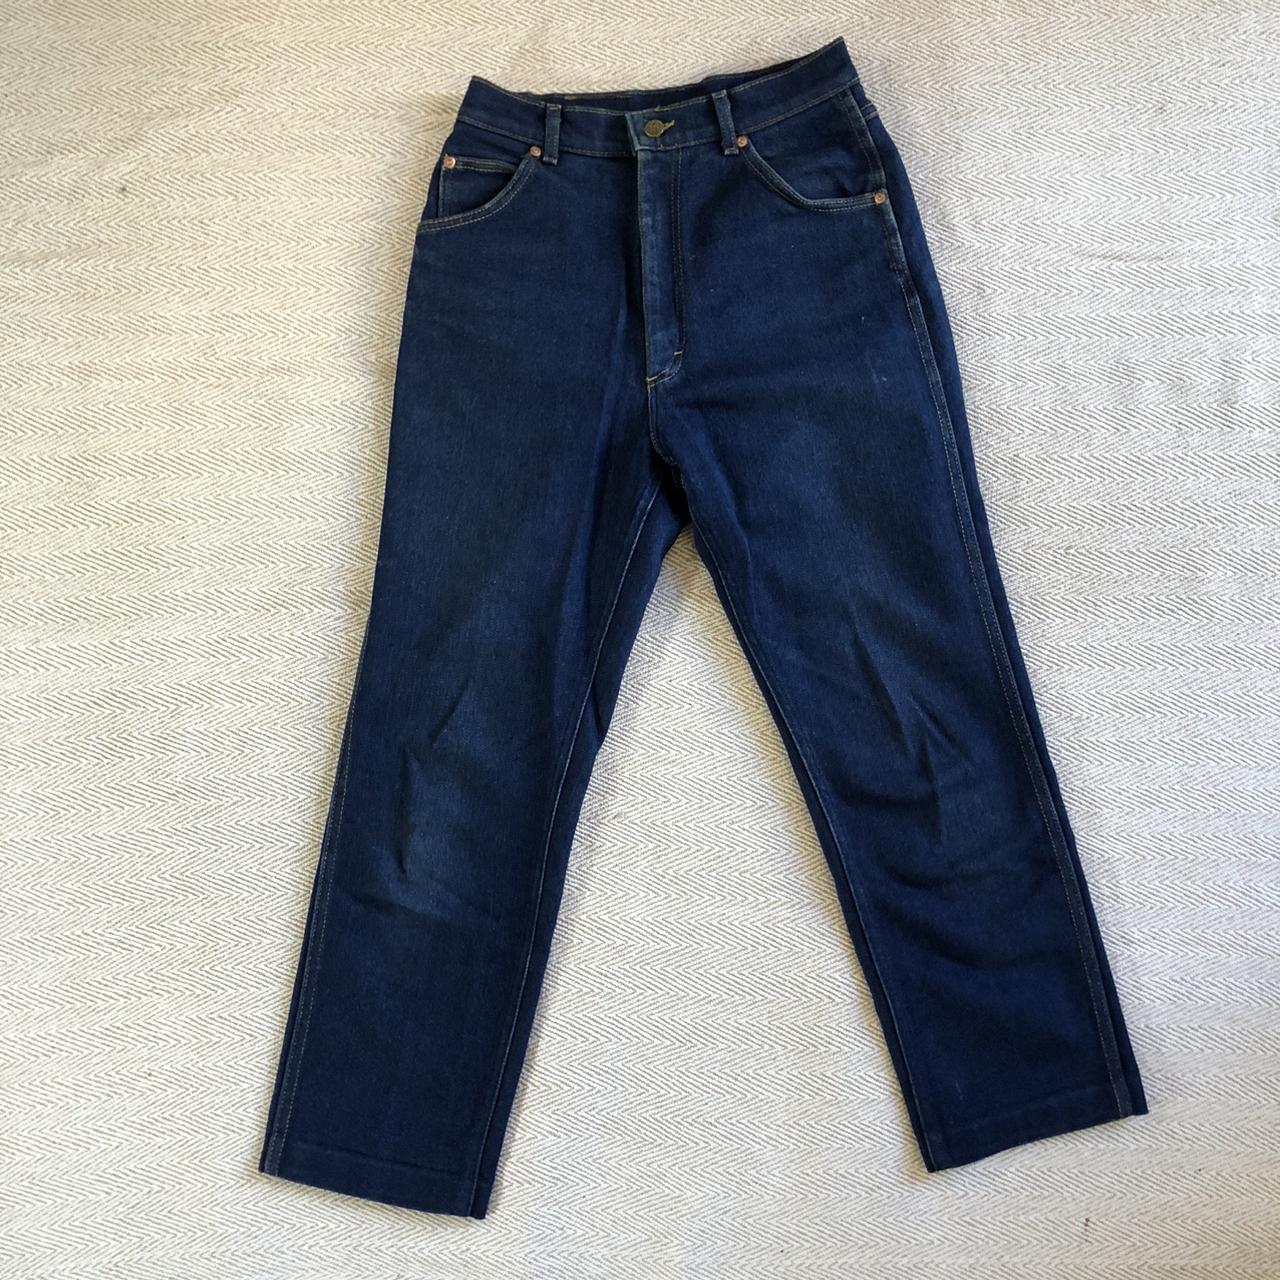 Lee Women's Navy and Blue Jeans | Depop